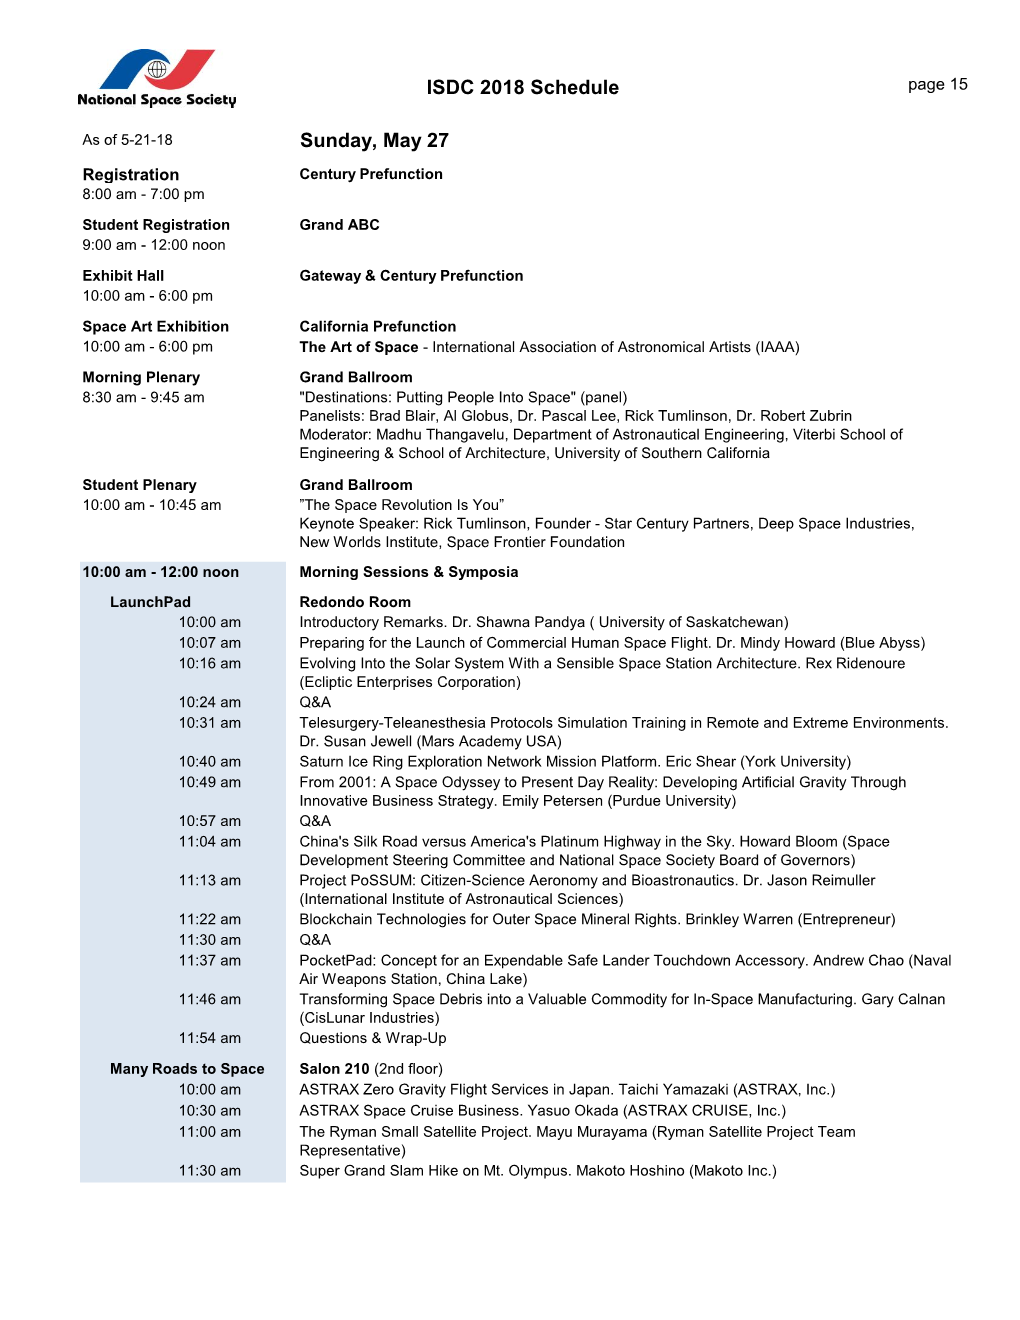 ISDC 2018 Schedule Sunday, May 27